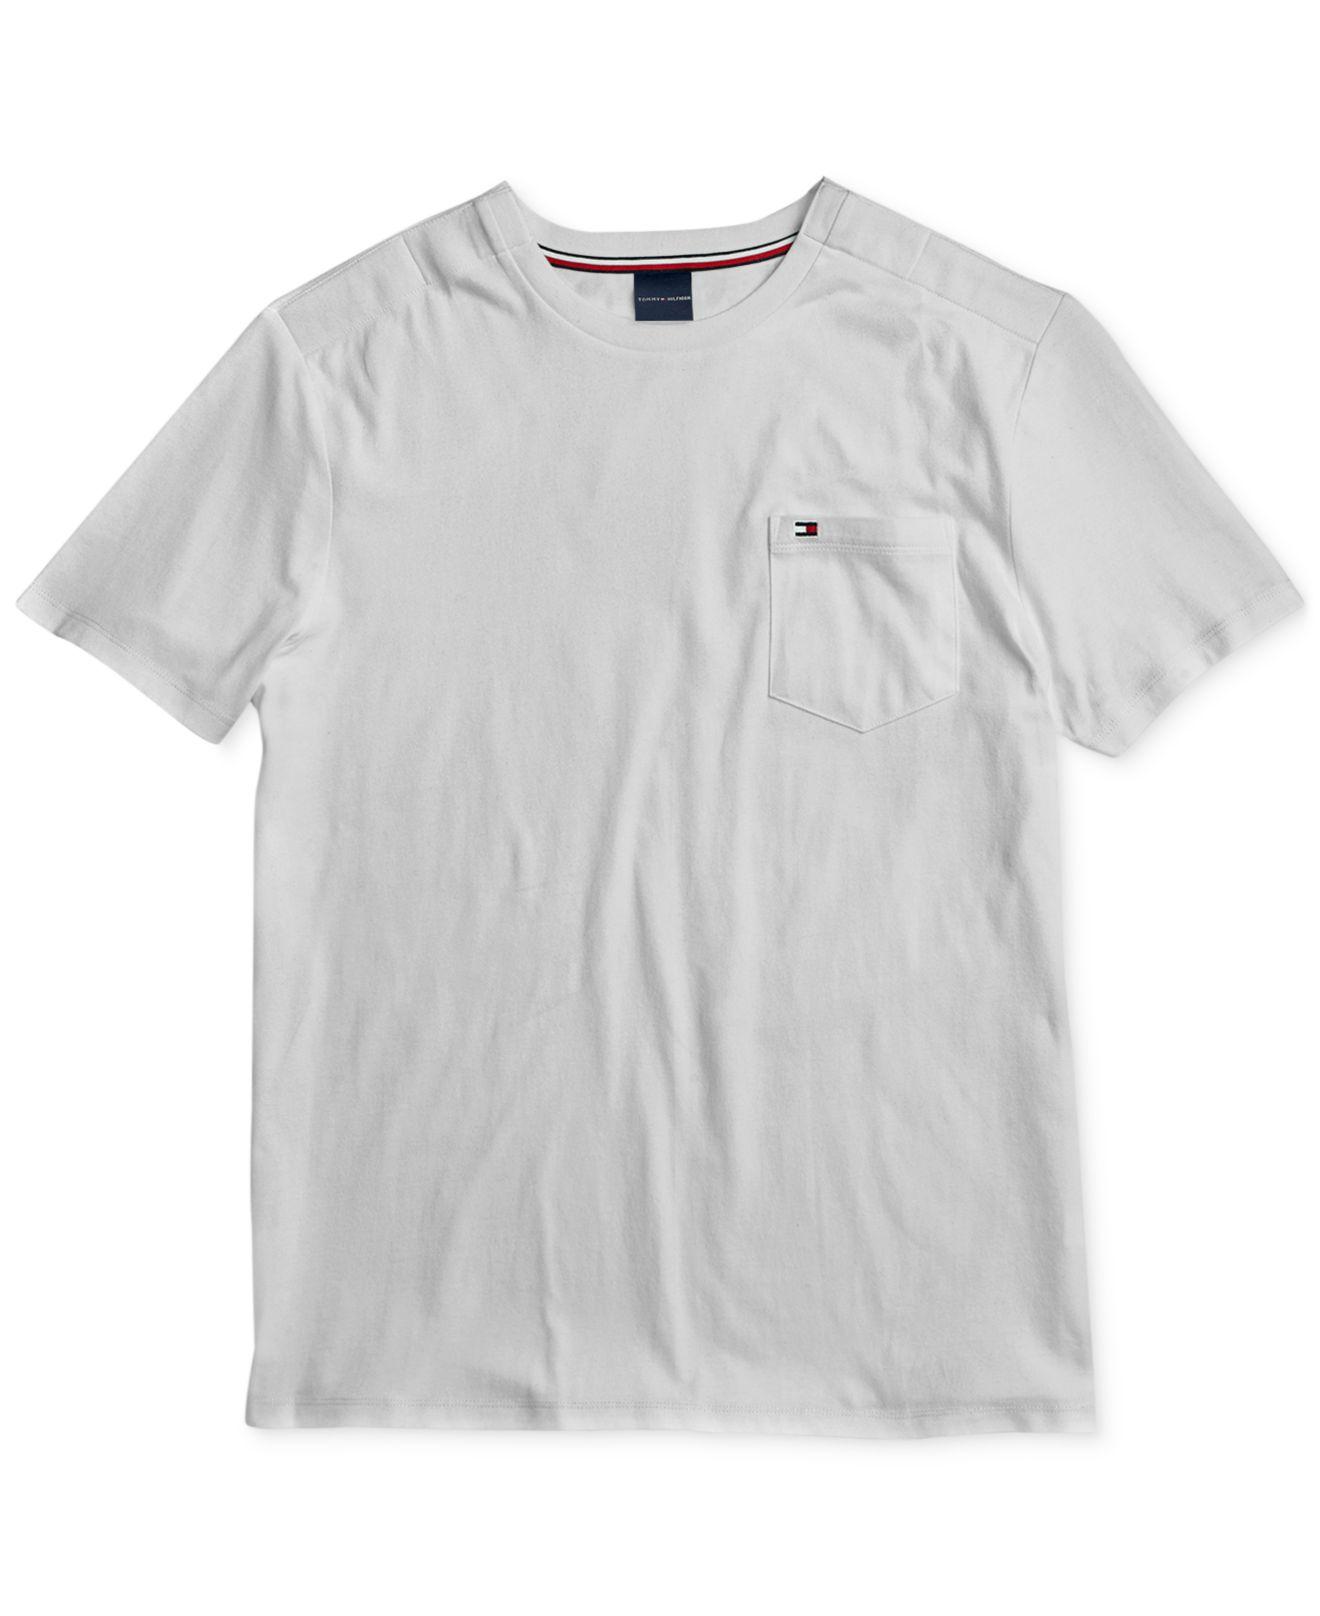 Tommy Hilfiger T-shirt With Magnetic Buttons in Gray for Men - Lyst